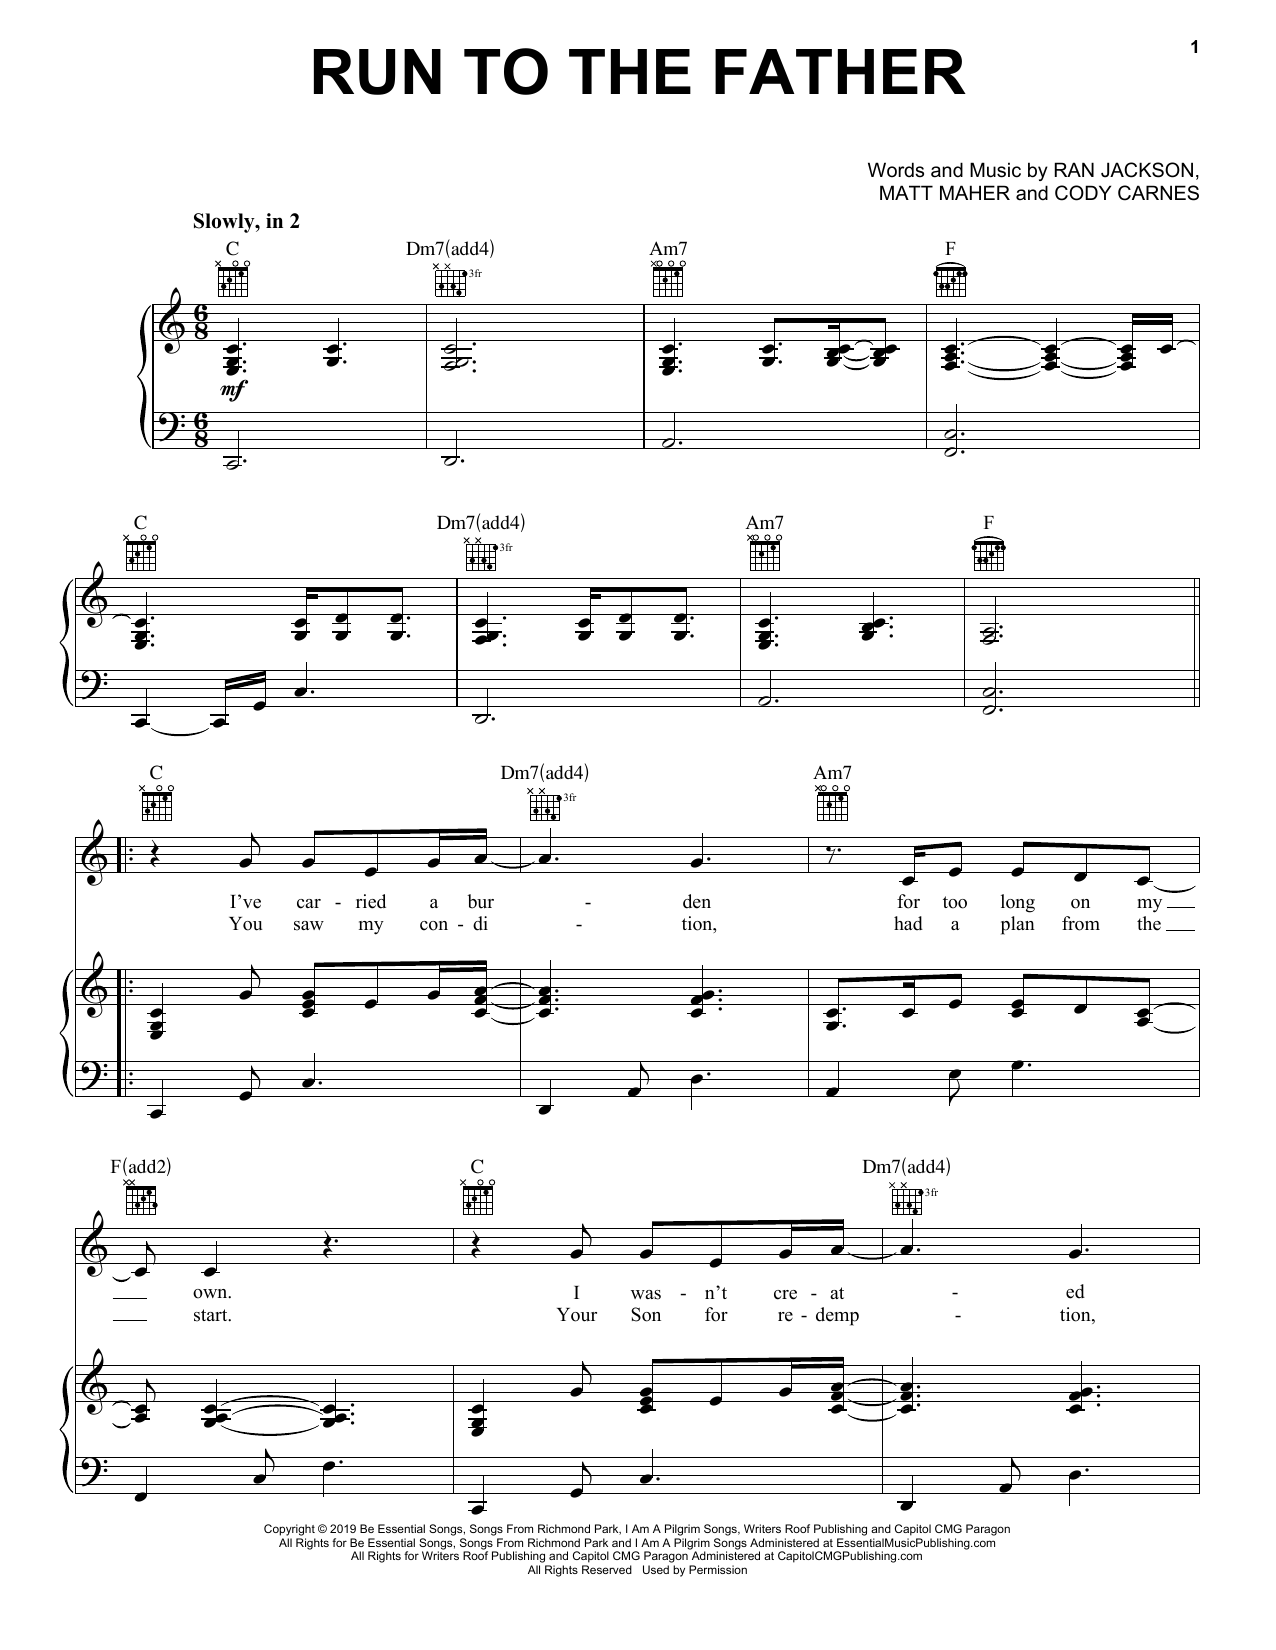 Download Cody Carnes Run To The Father Sheet Music